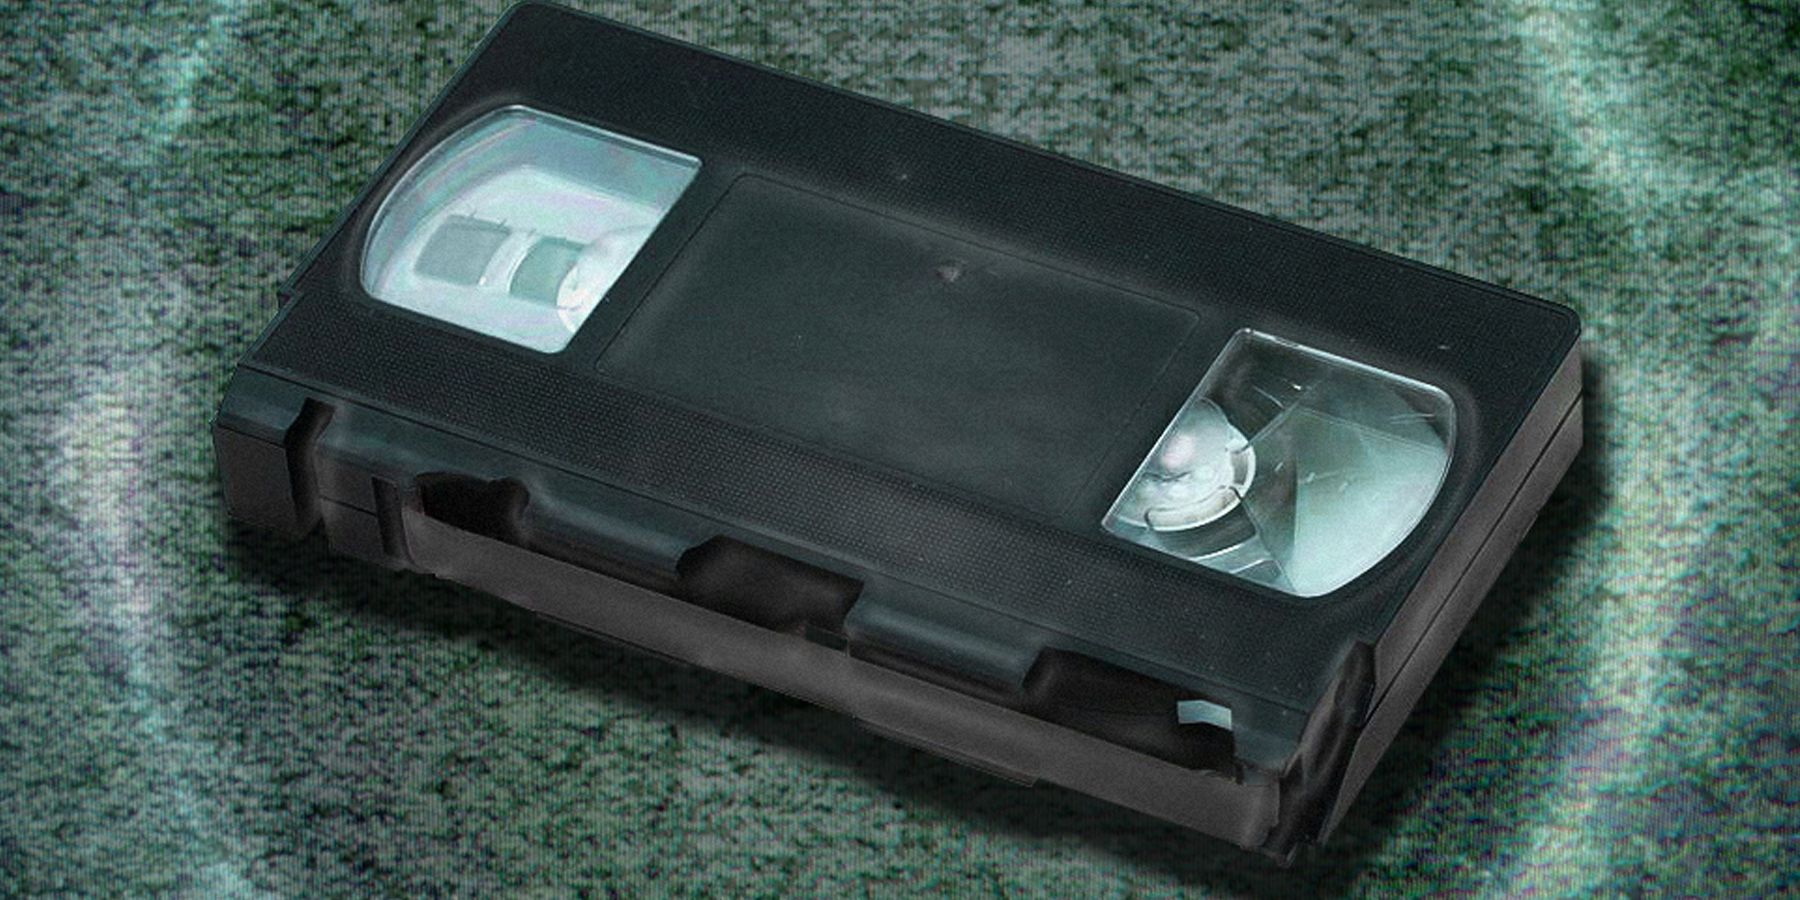 The Cursed Videotape in The Ring